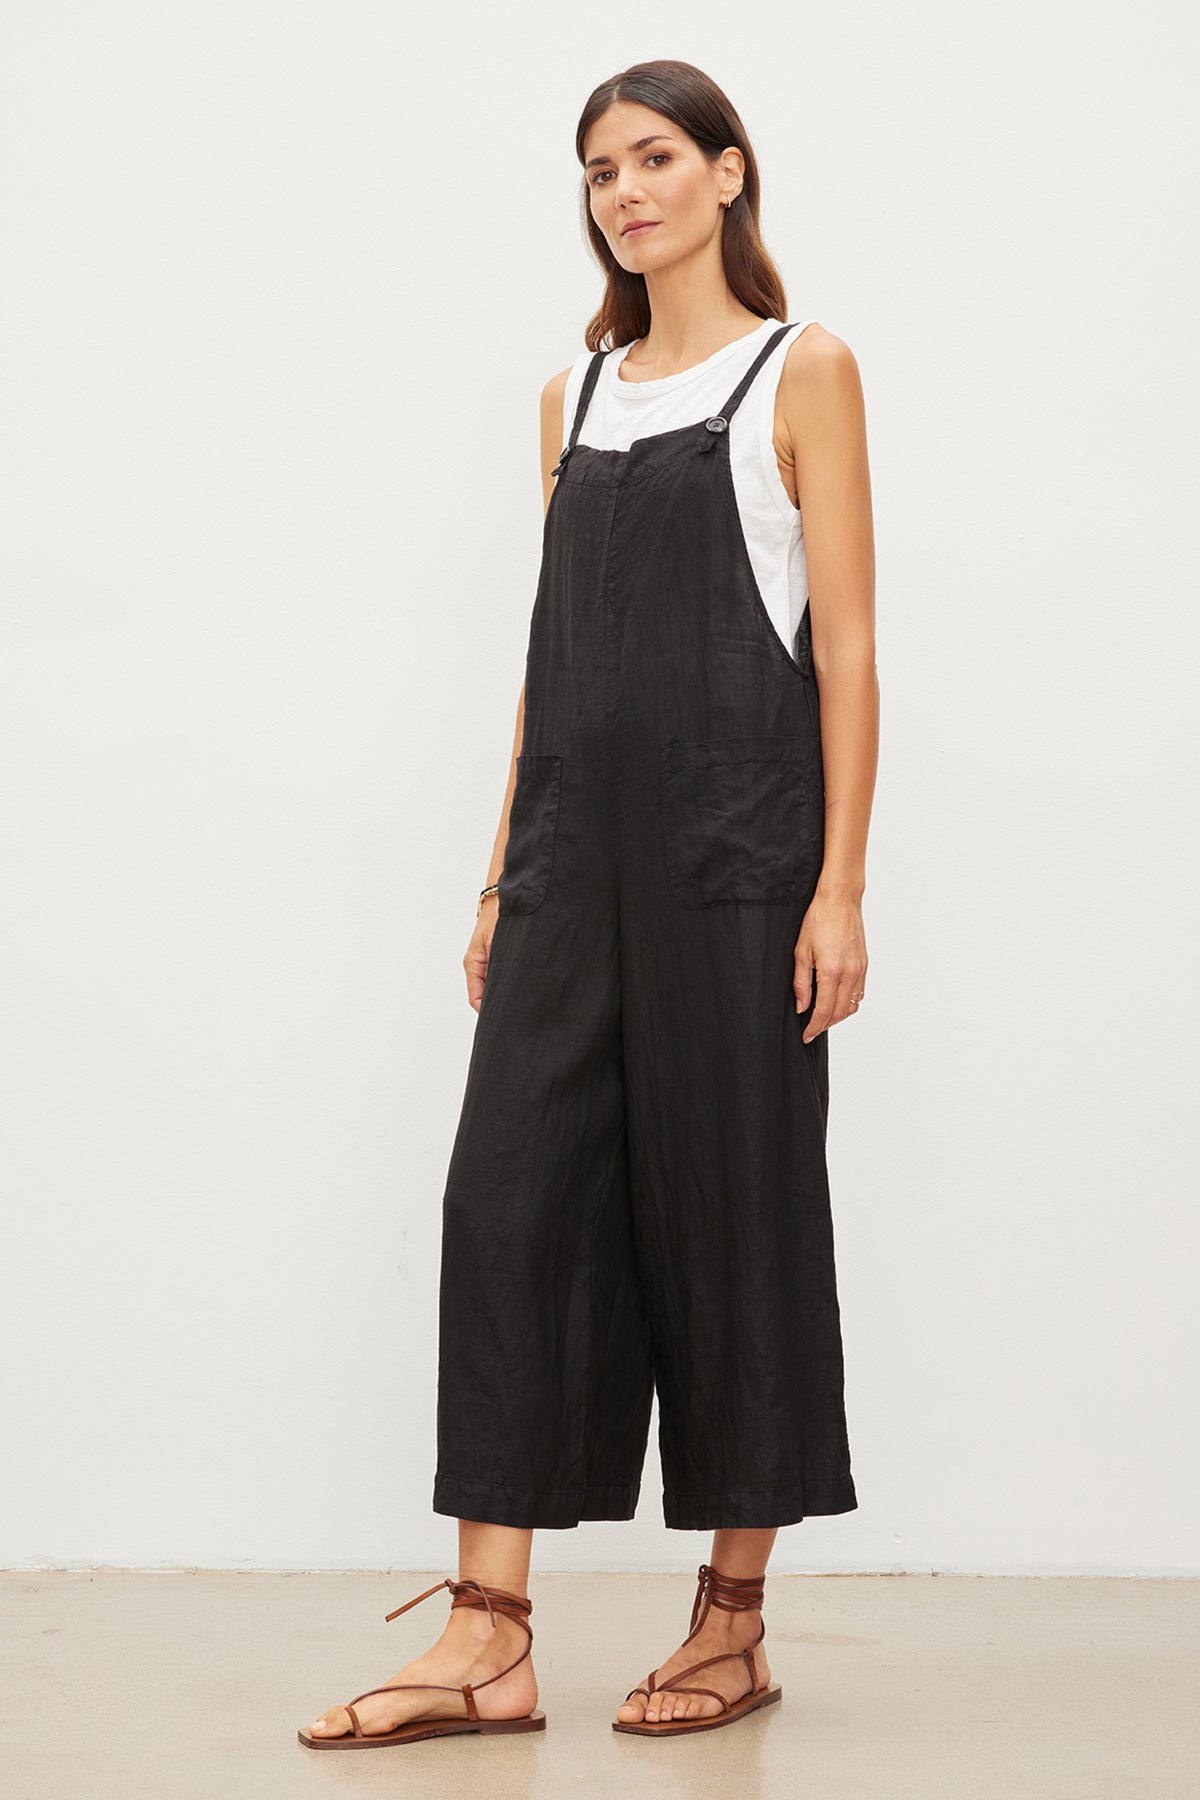 Woman standing in a studio wearing black overalls with patch pockets and a white tank top, paired with brown strappy sandals. - Woman standing in a studio wearing Velvet by Graham & Spencer's Isabel Linen Jumper, paired with brown strappy sandals.-35967680151745